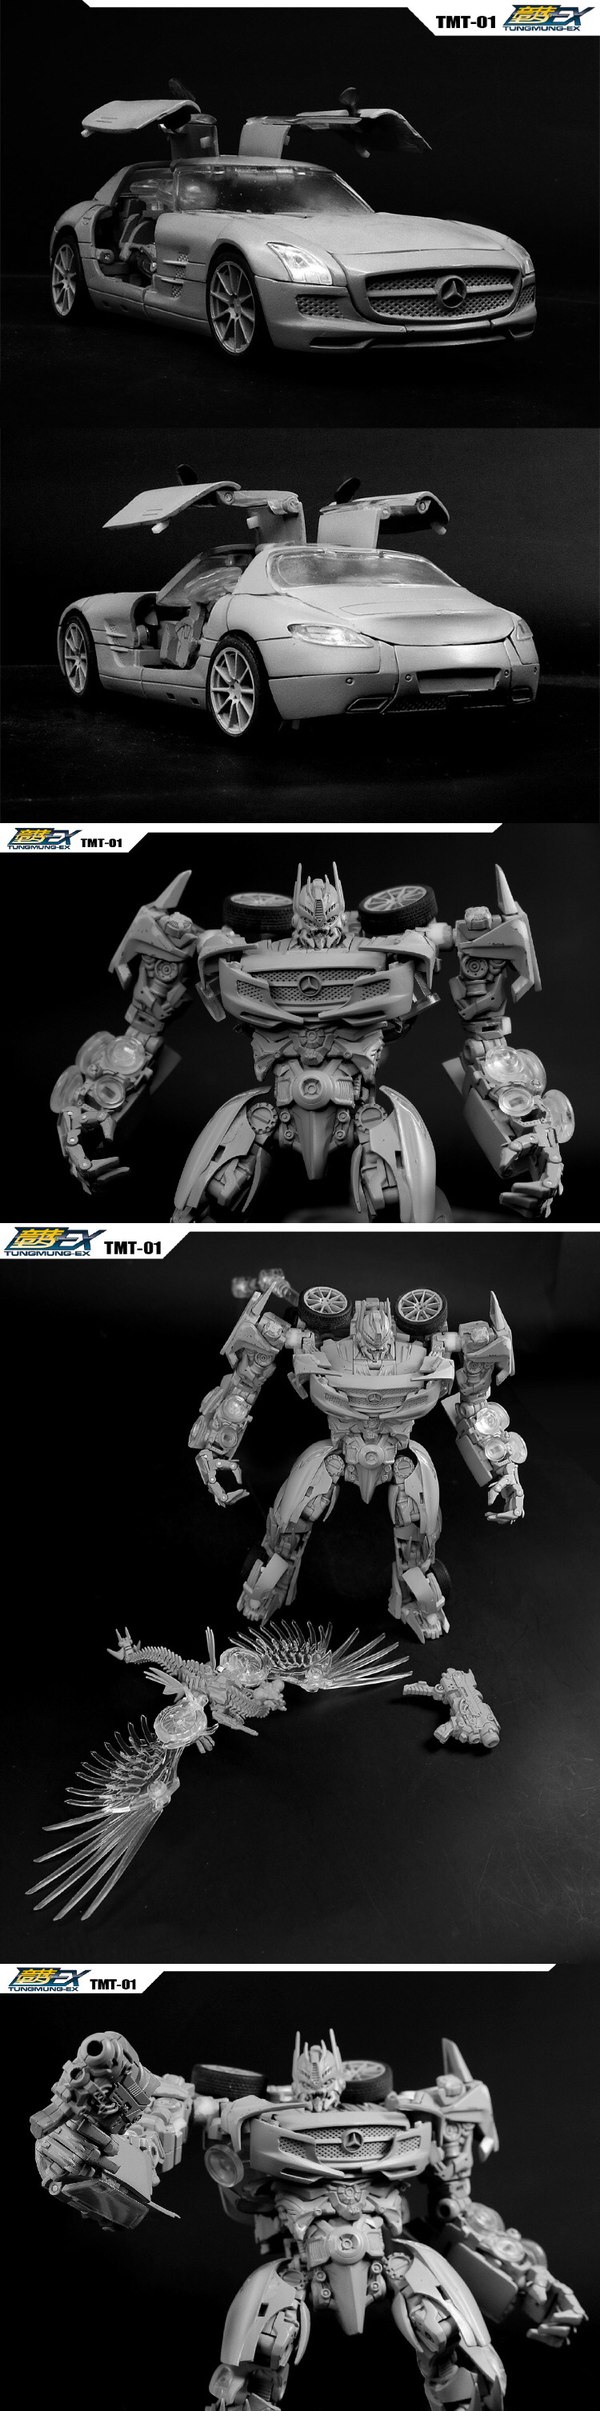 Unofficial Movie Soundwave Masterpiece Style Figure Prototype Images  (9 of 9)